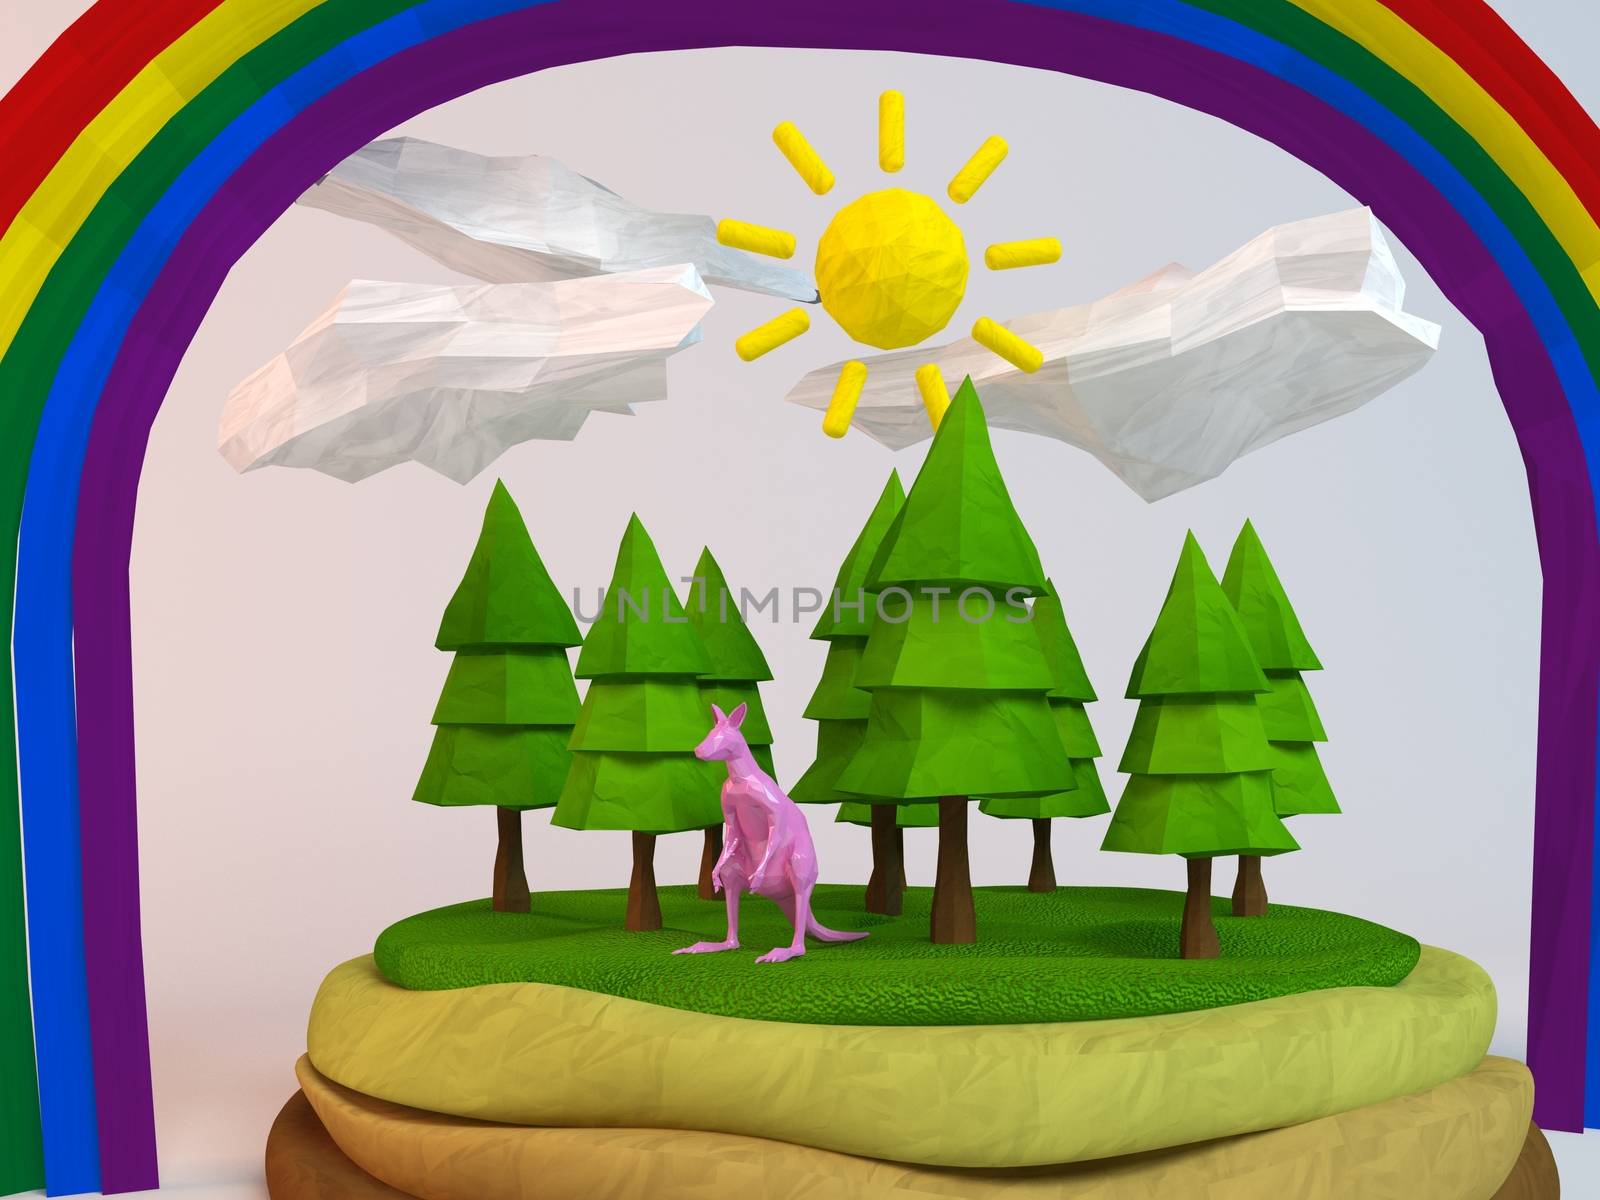 3d kangaroo inside a low-poly green scene by fares139